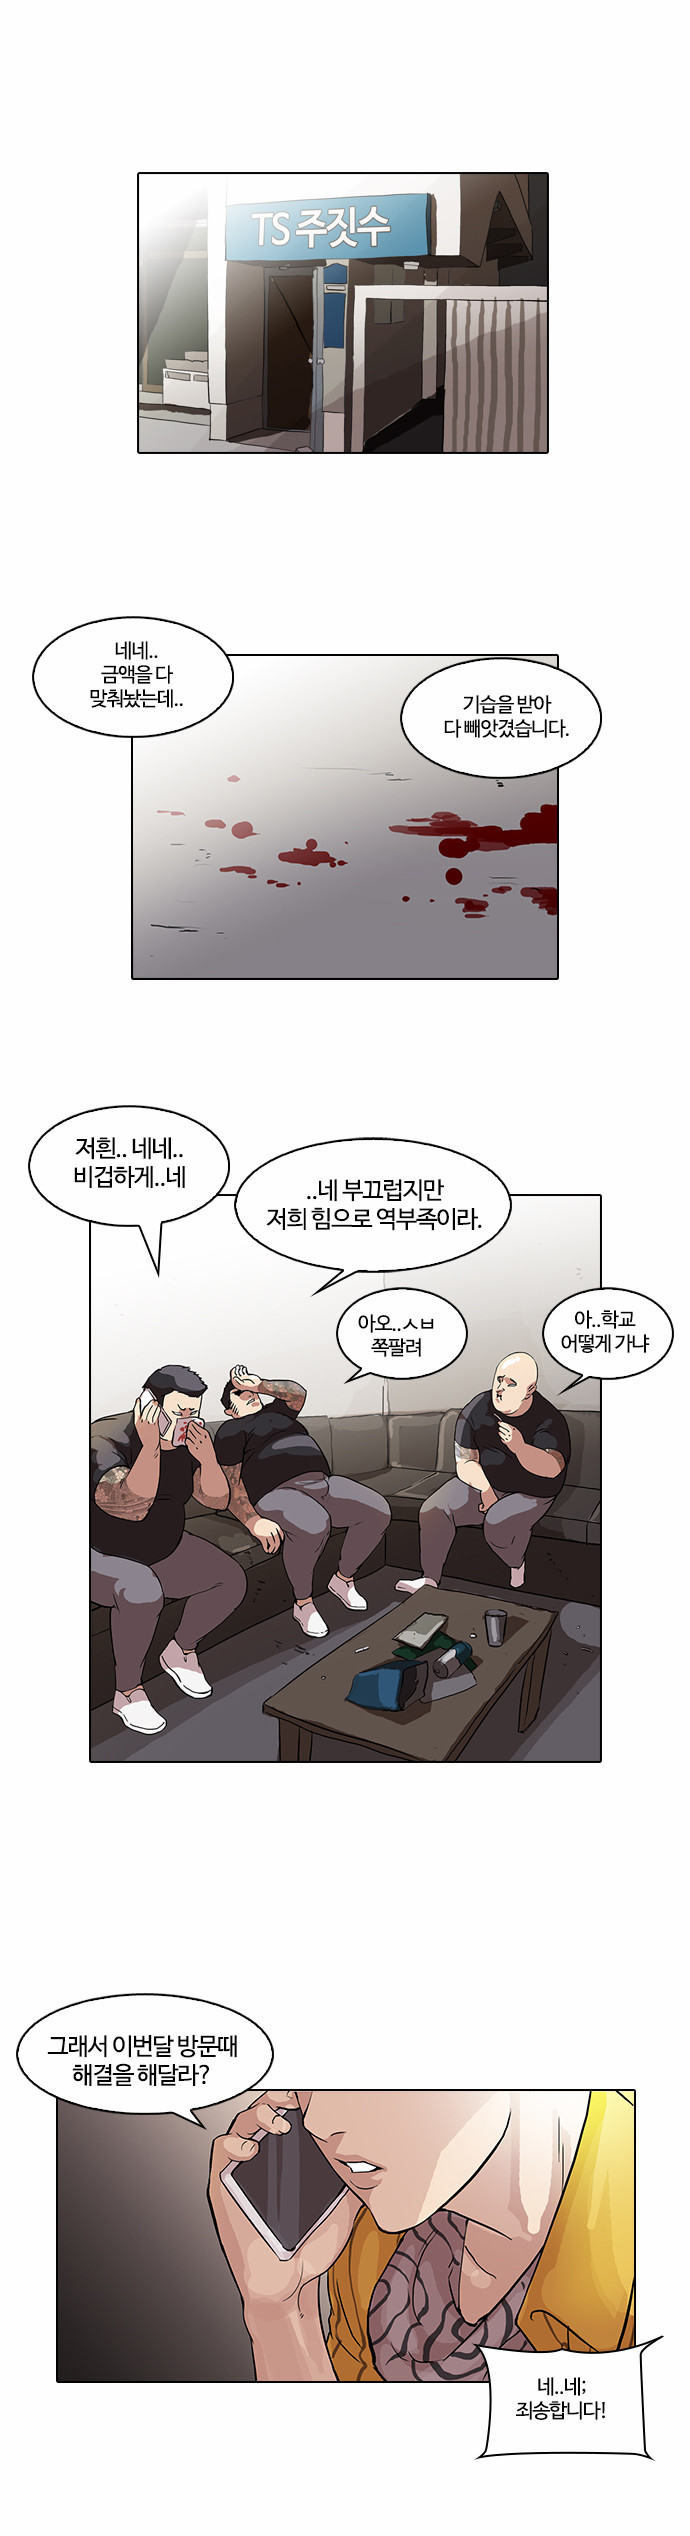 Lookism - Chapter 49 - Page 4